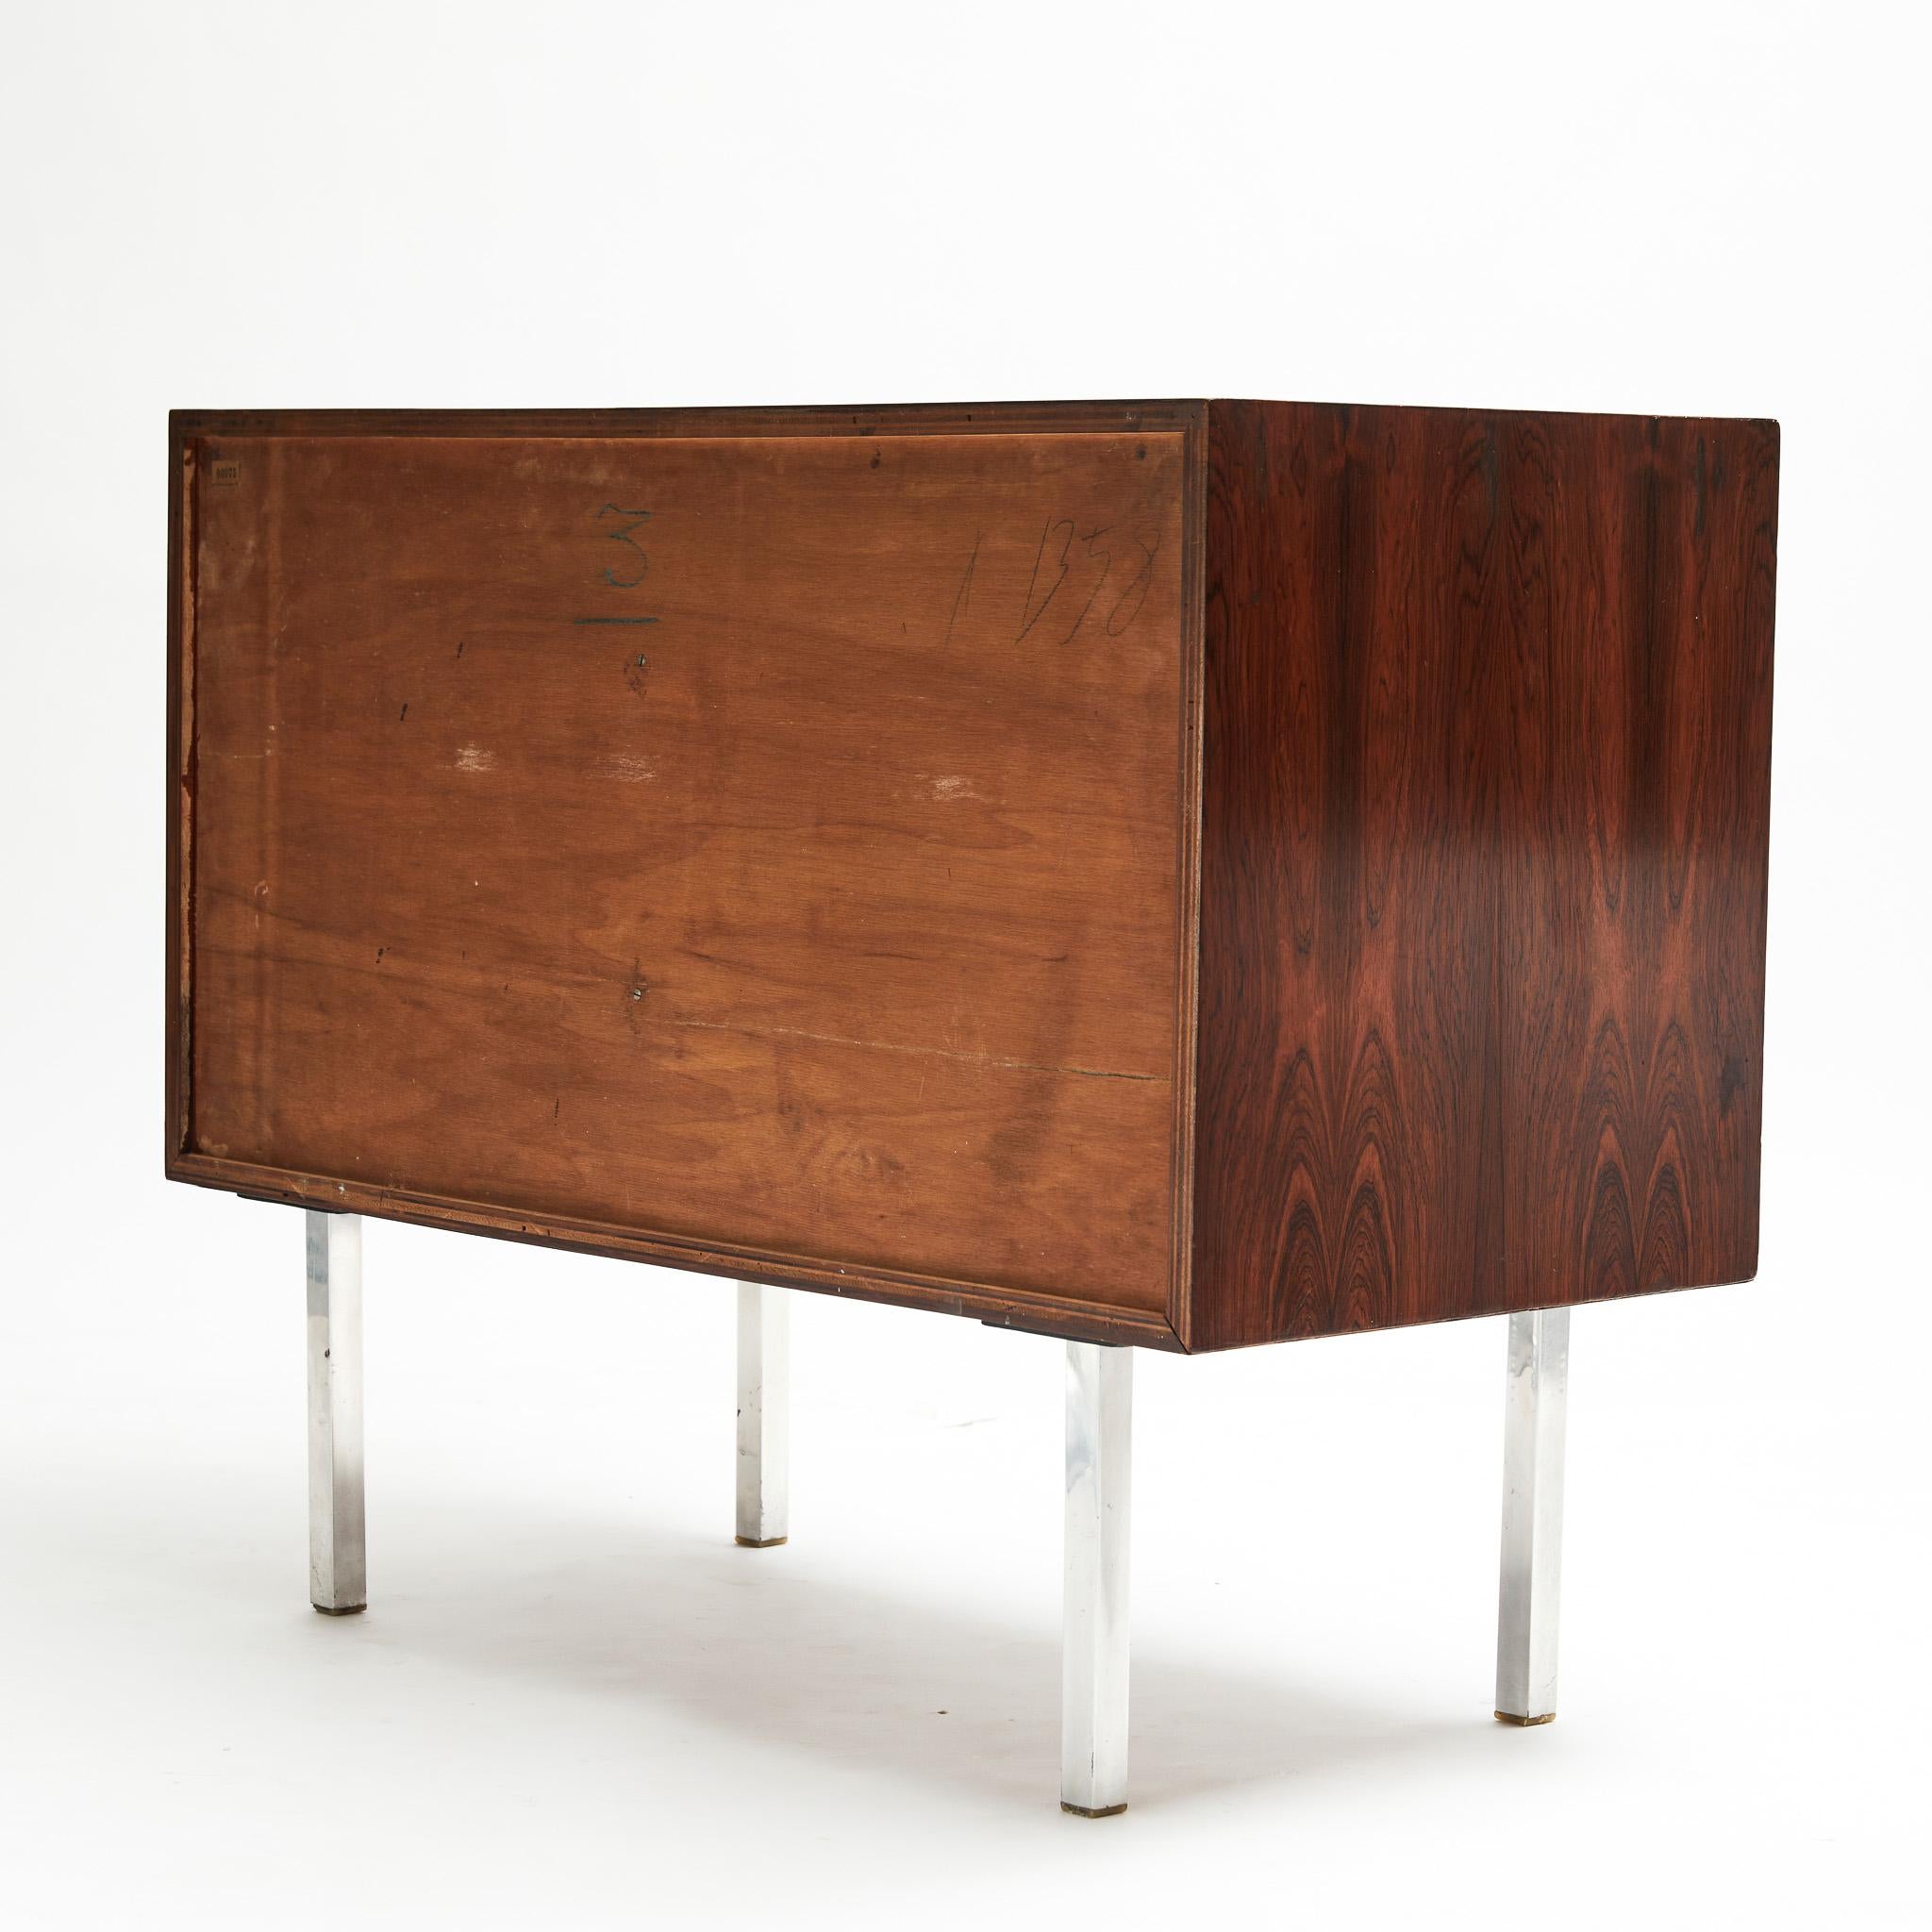 20th Century Midcentury Chest in Hardwood & Chrome by Forma Moveis, 1965 Brazil, Sealed For Sale